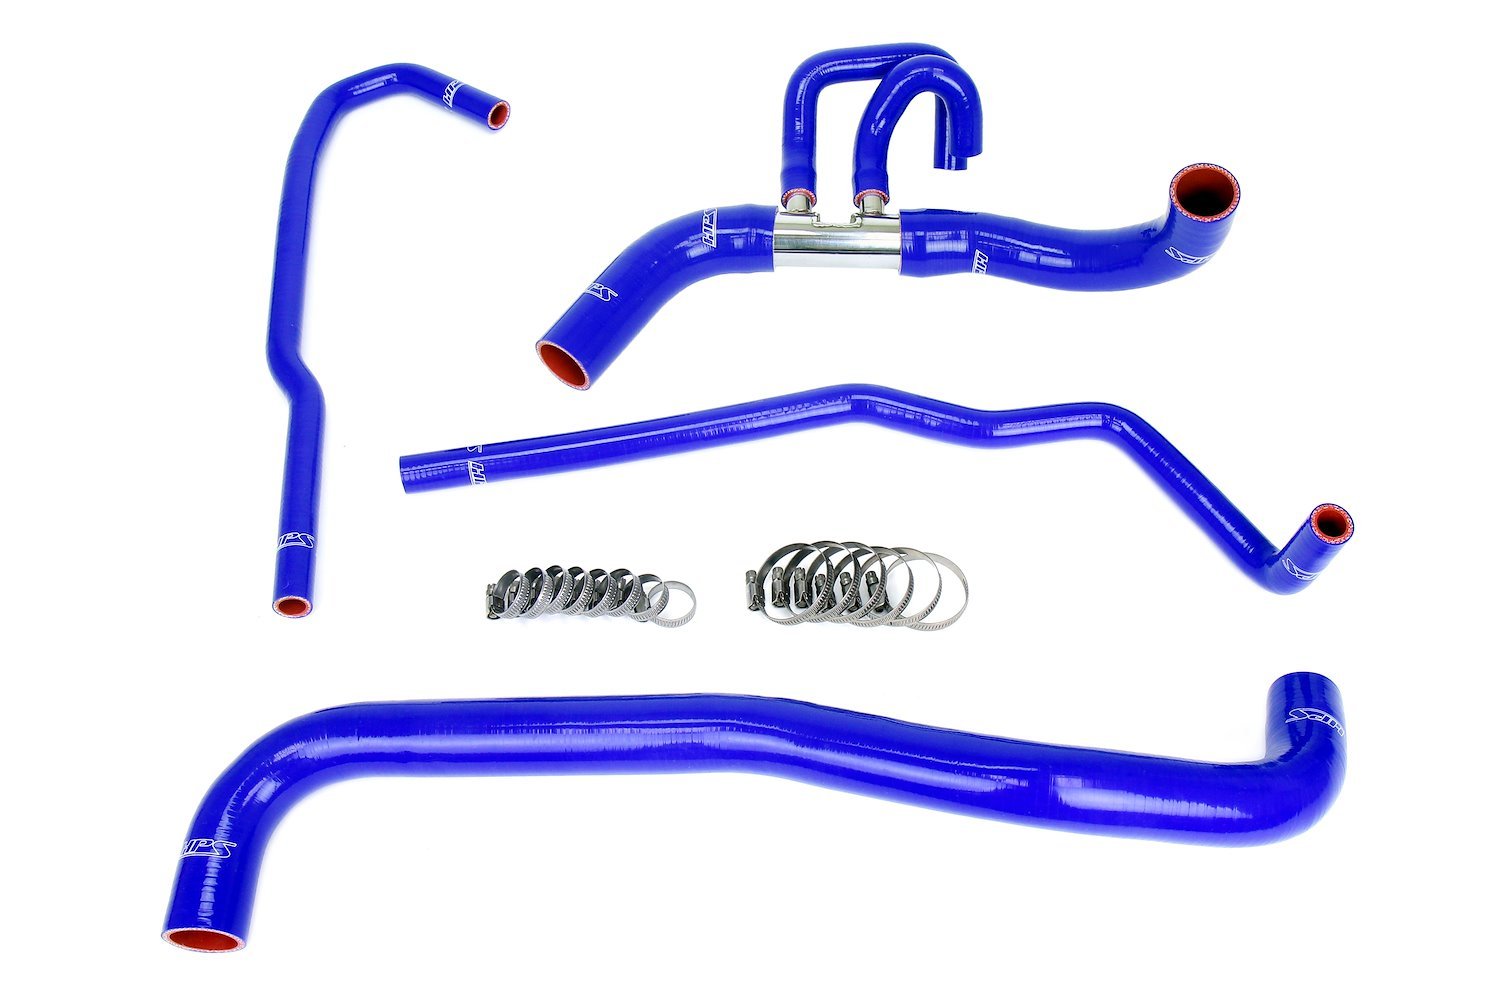 57-2090-BLUE Radiator Hose Kit, High-Temp 3-Ply Reinforced Silicone, Replaces OEM Rubber Radiator Coolant Hoses